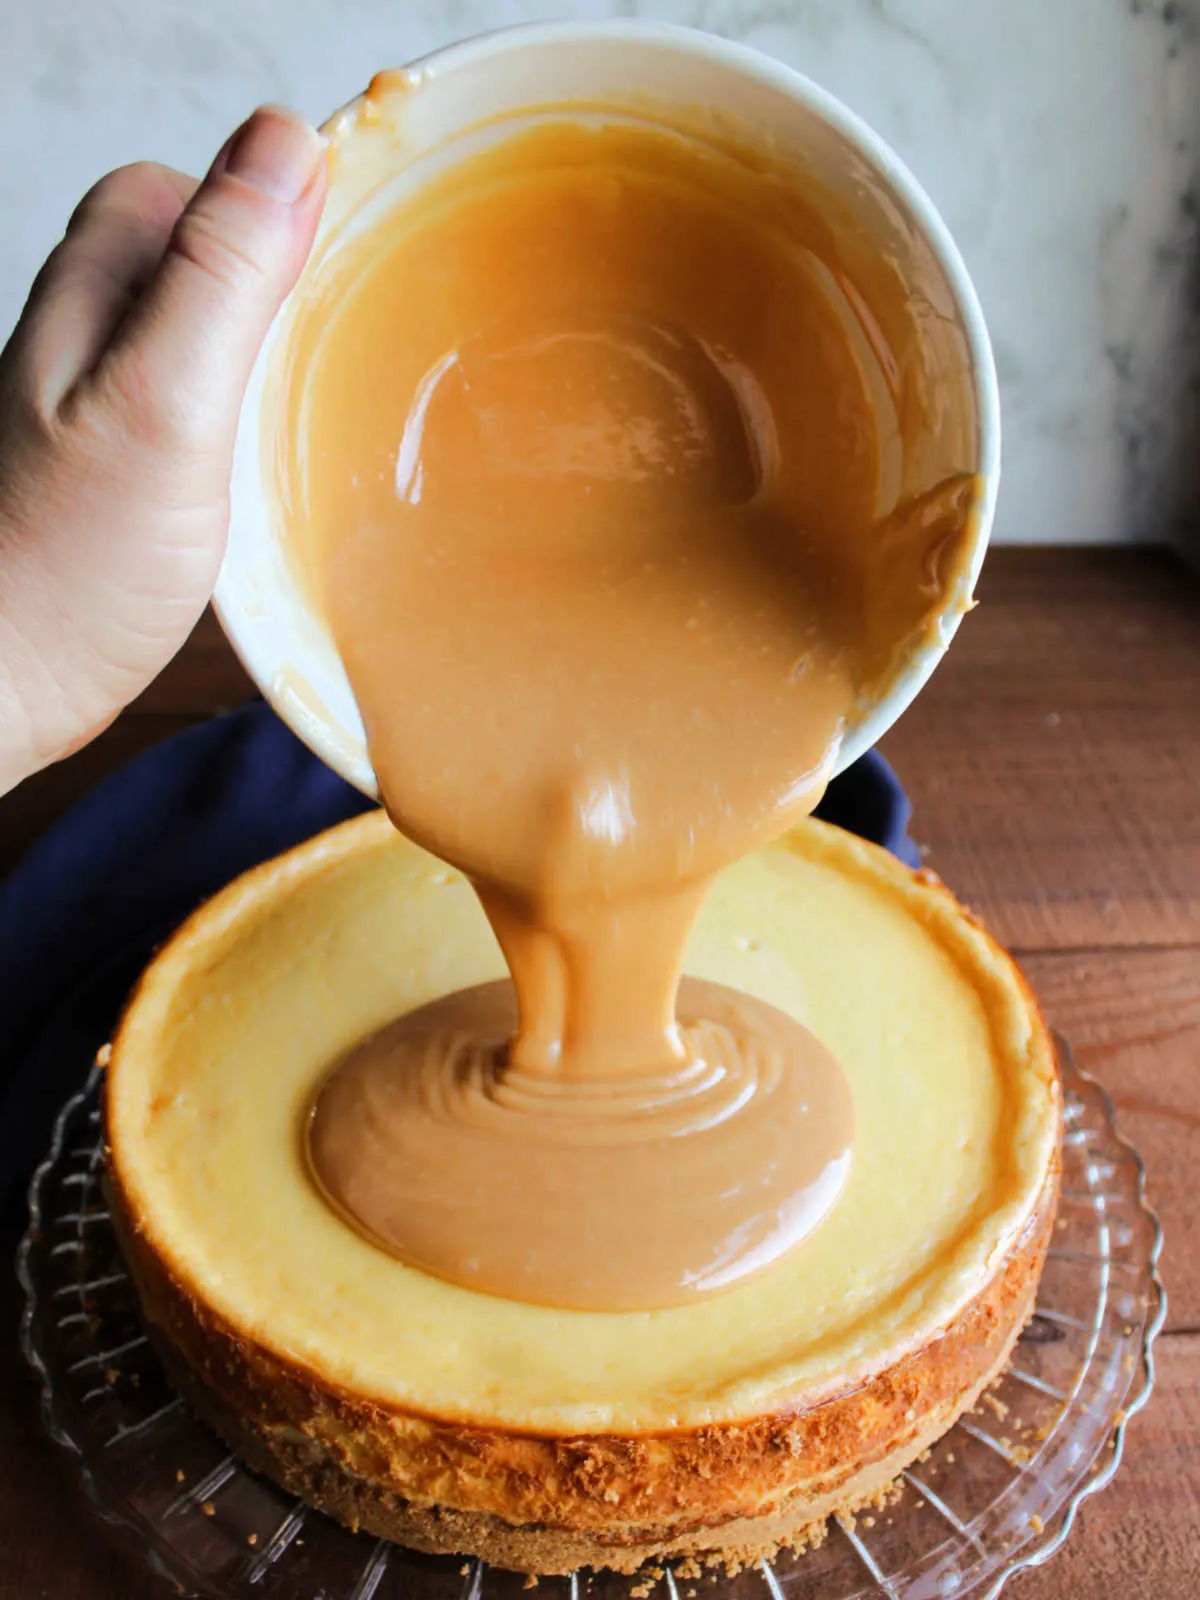 Pouring warm caramel sauce over cooled cheesecake.